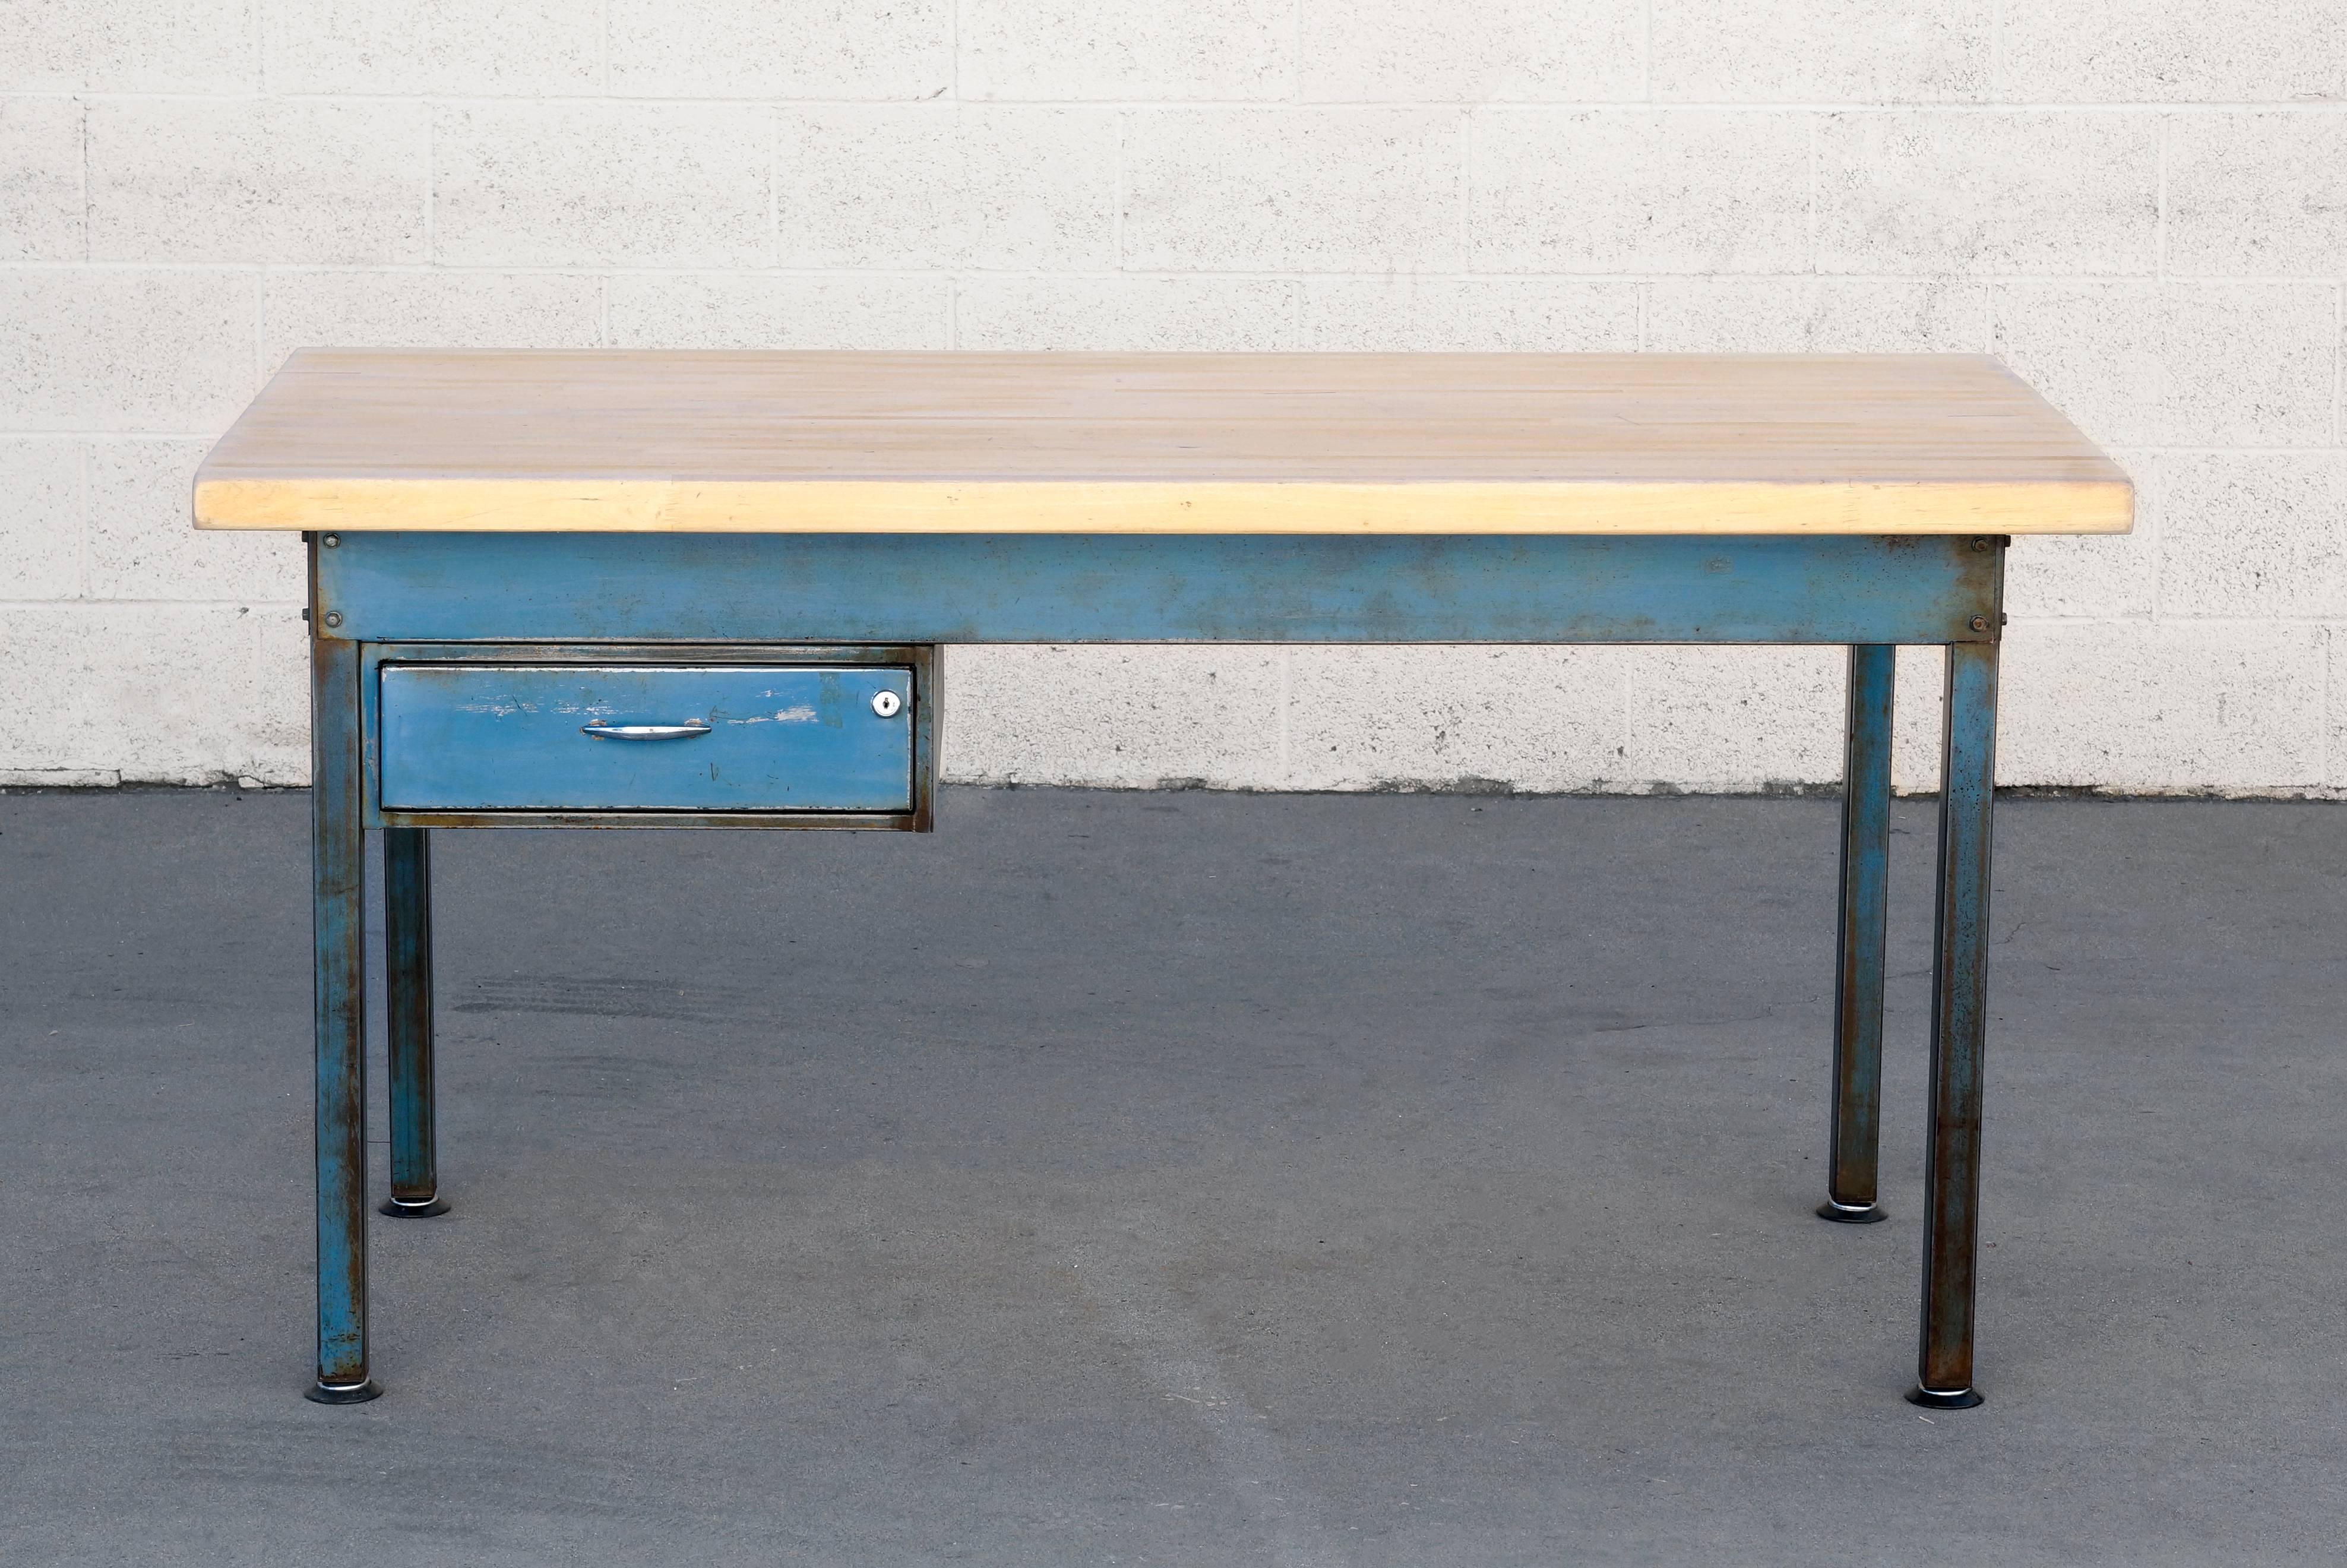 1960s Industrial steel workbench with a gorgeous blue patina. We added a reclaimed maple top and finished the frame with a light lacquer topcoat and adjustable levelers. Put this excellent multifunctional piece to use in your kitchen, office, studio